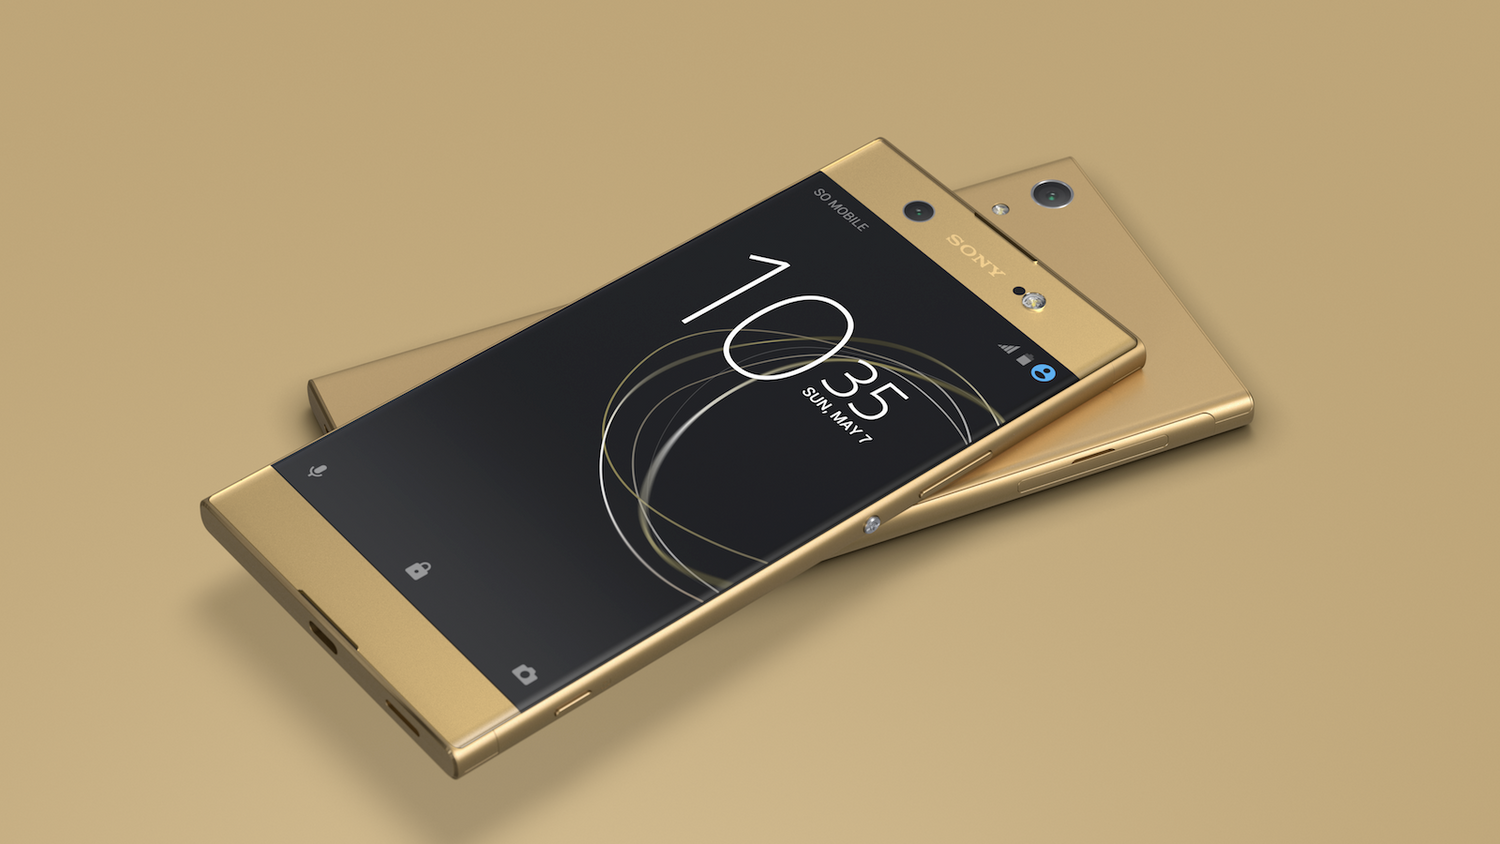 Update: Xperia XA Nougat is rolling out to the Sony Ultra